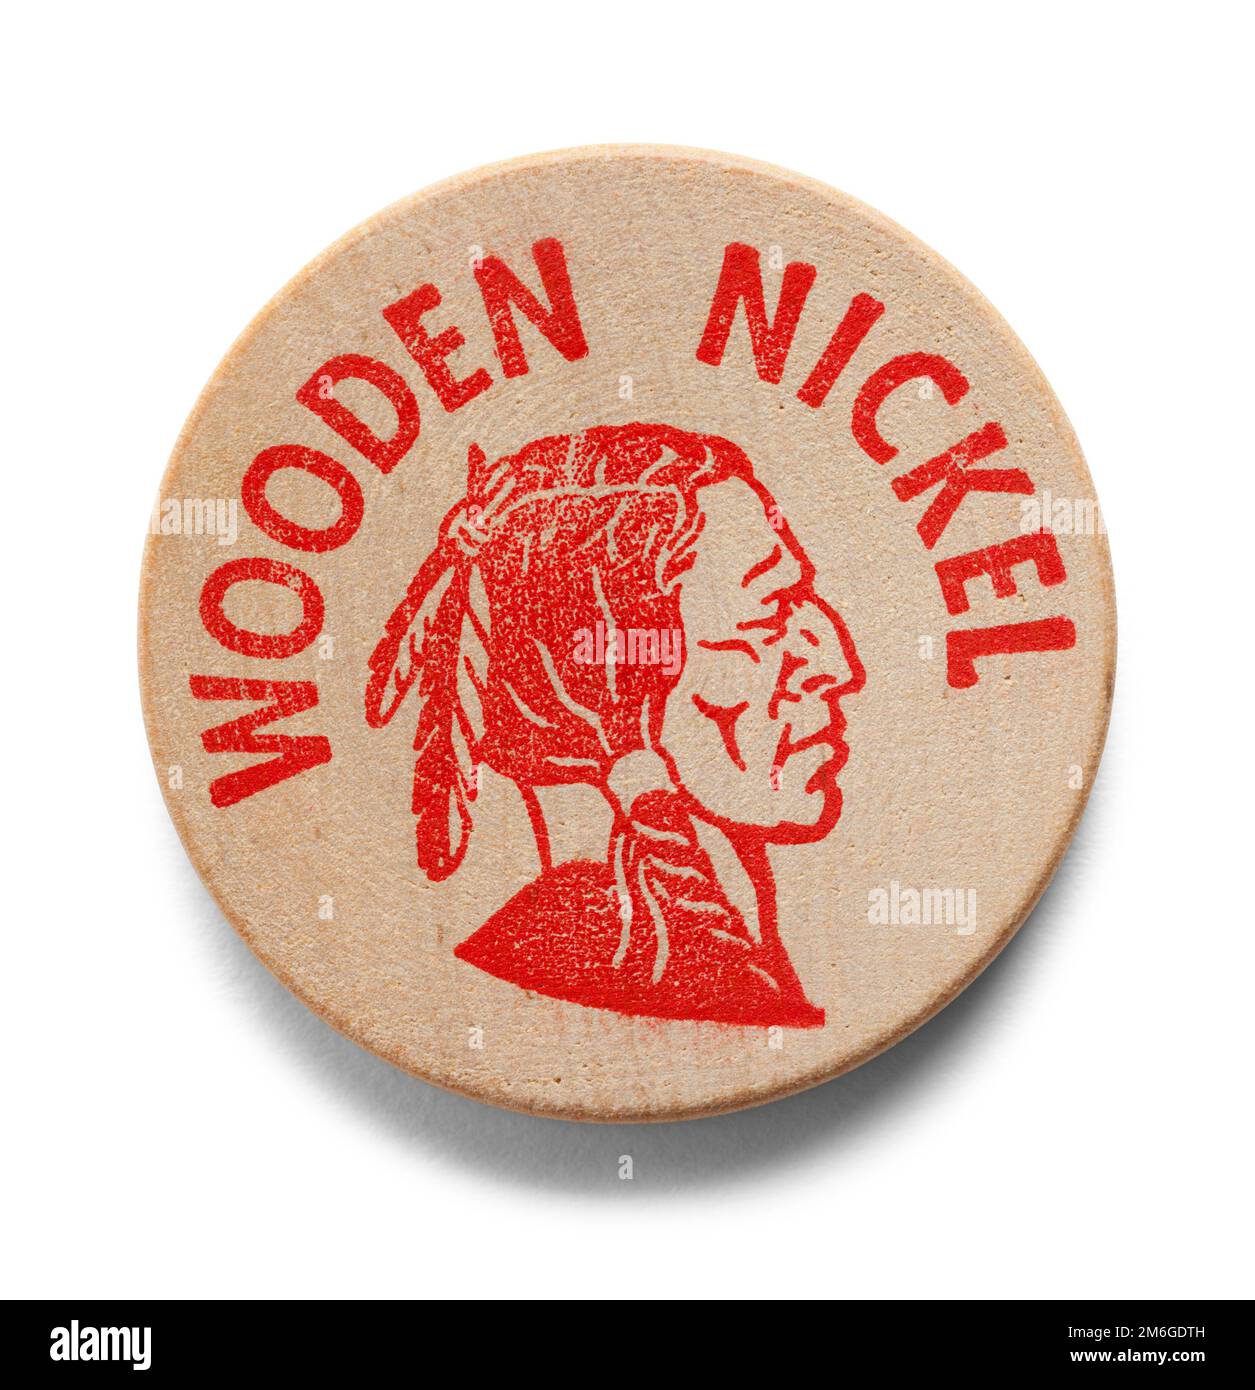 Wooden Nickel Coin with Indian Head Cut Out on White. Stock Photo